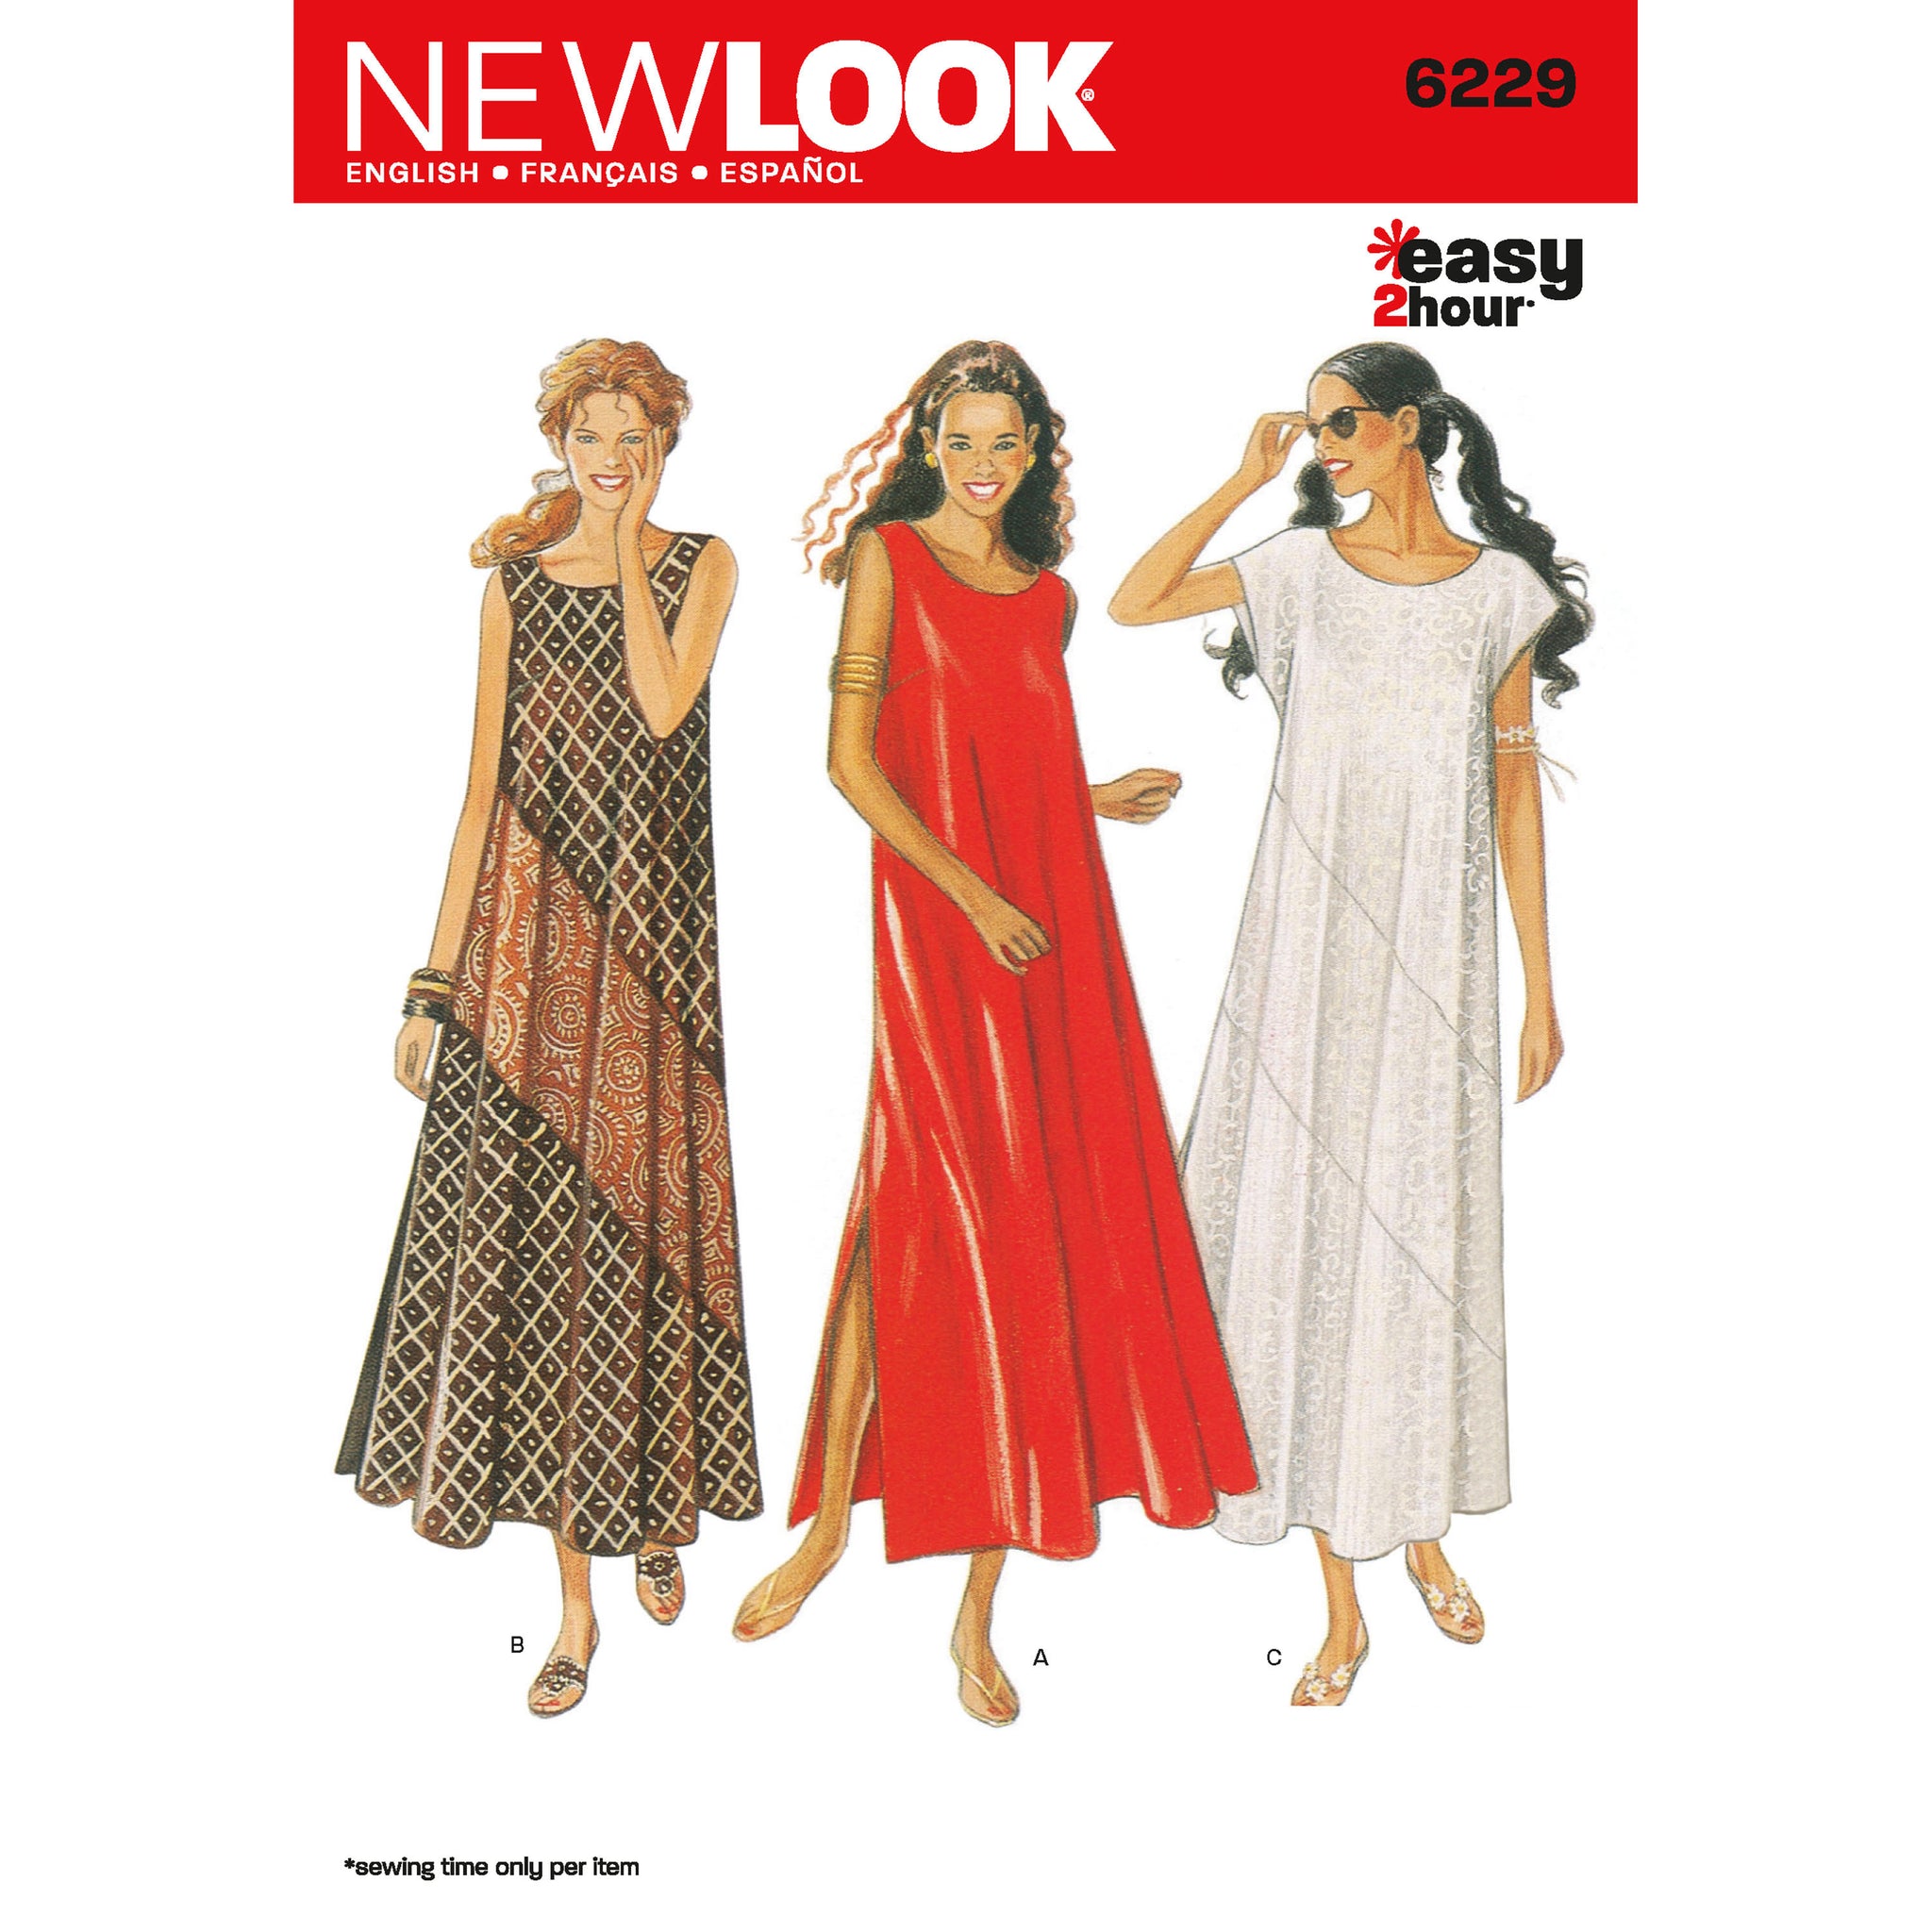 New Look Sewing Patterns | LoveCrafts